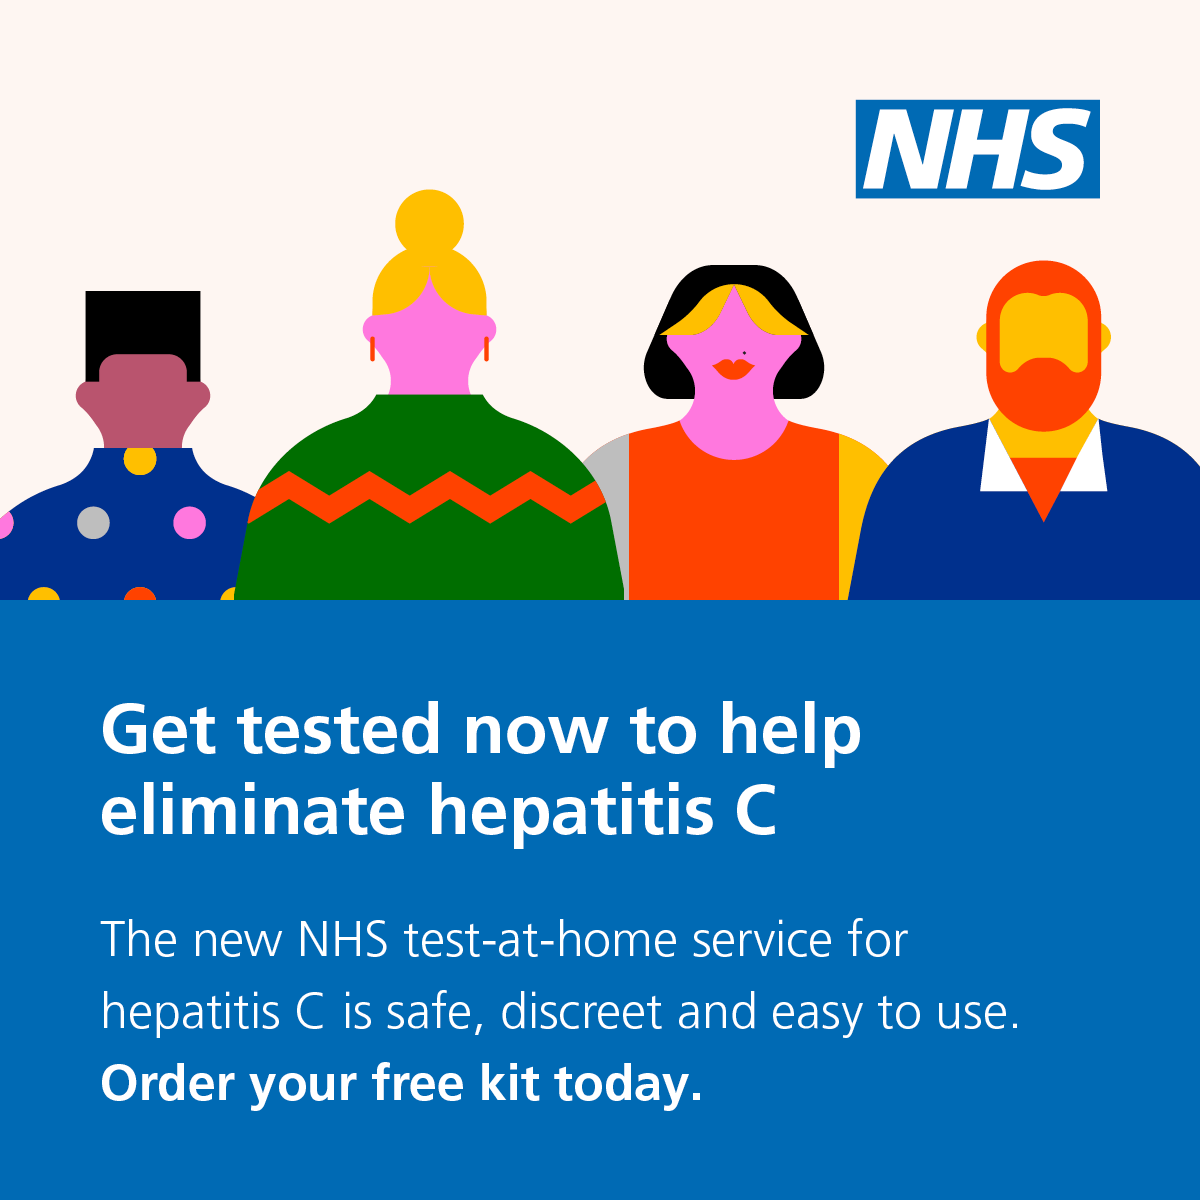 Anyone worried they may be at risk of hepatitis C can order a confidential test online through our new website. ➡️ hepctest.nhs.uk